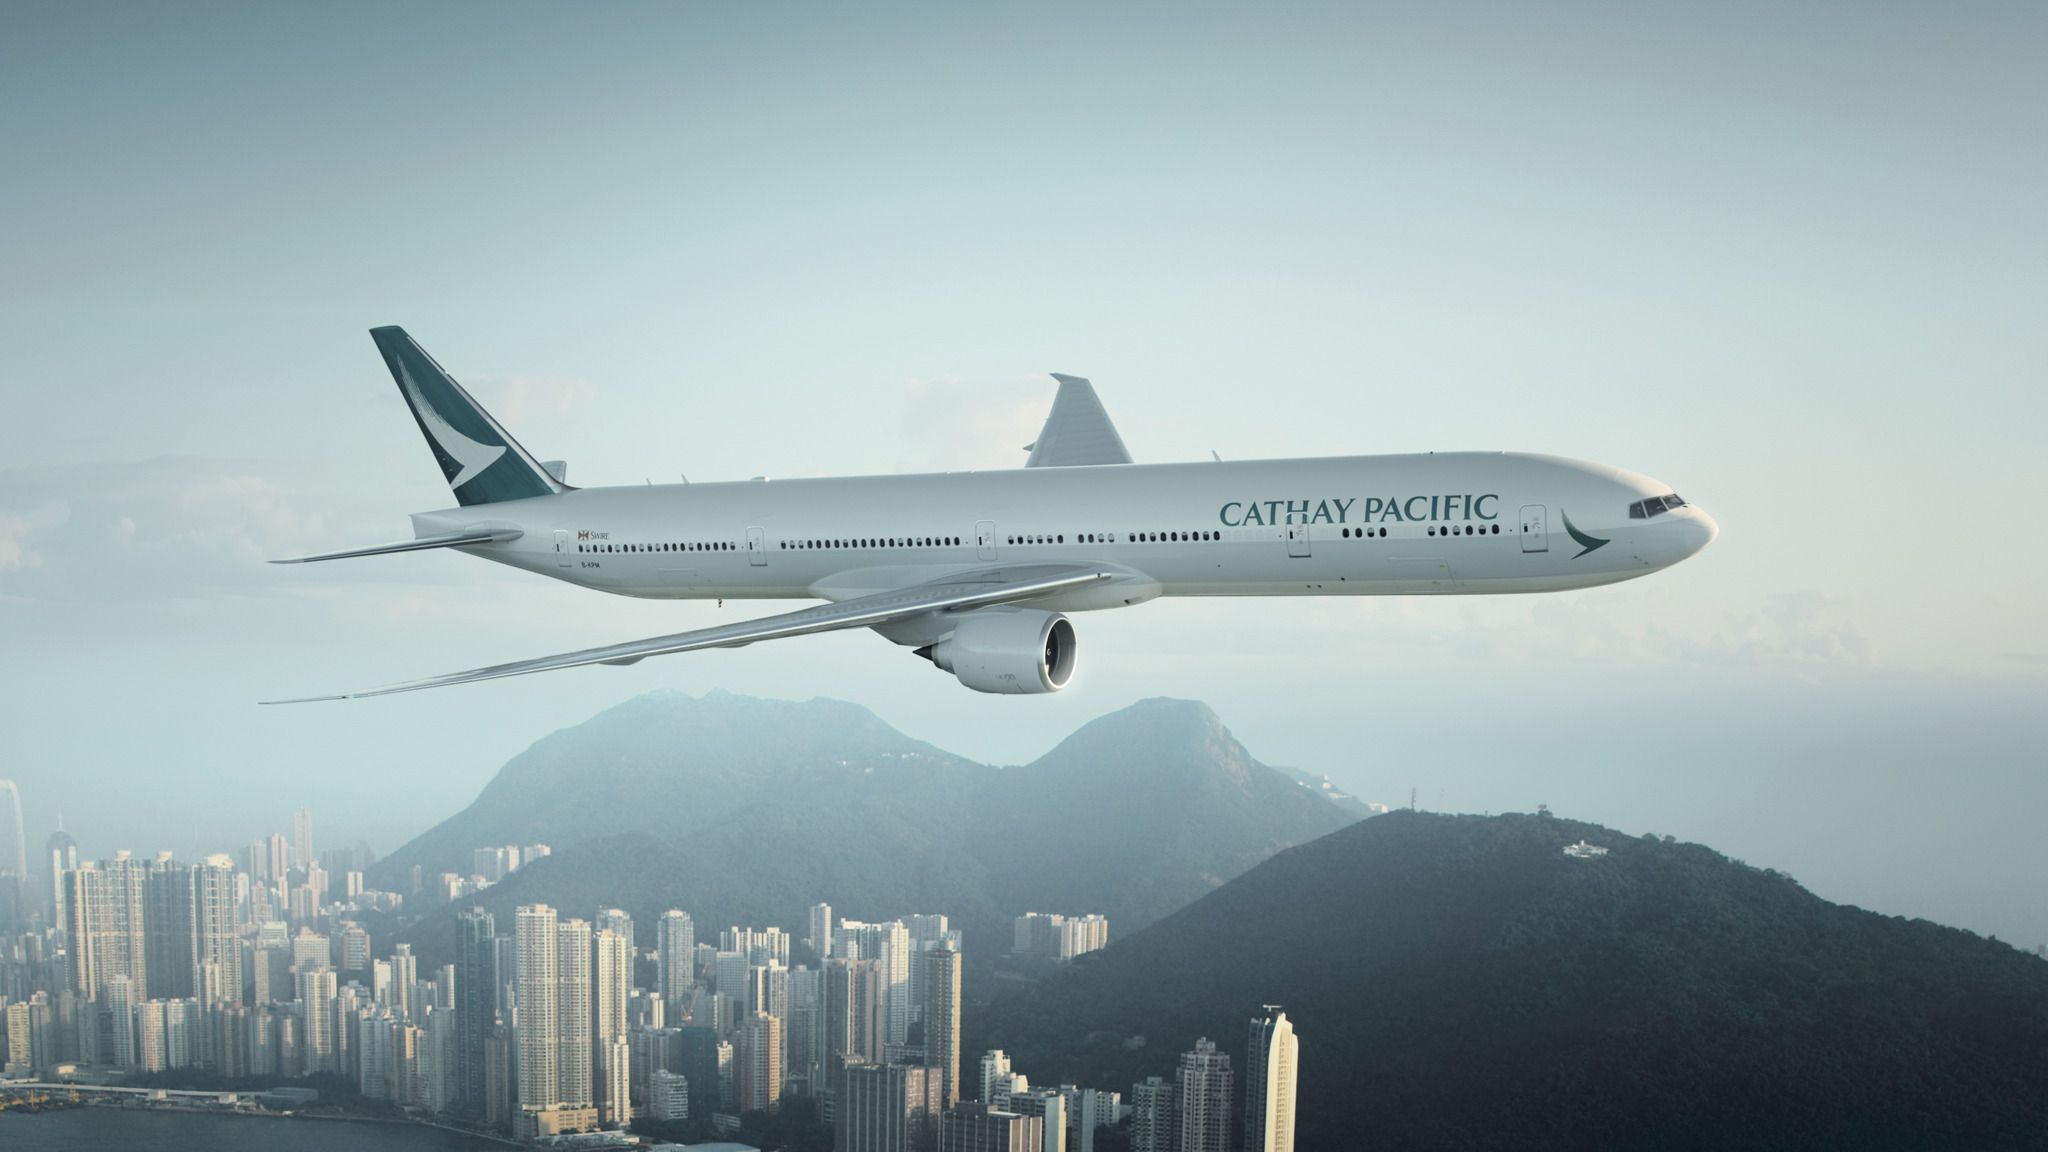 Cathay Pacific posts profit increase of 90.5% to HK$6 billion